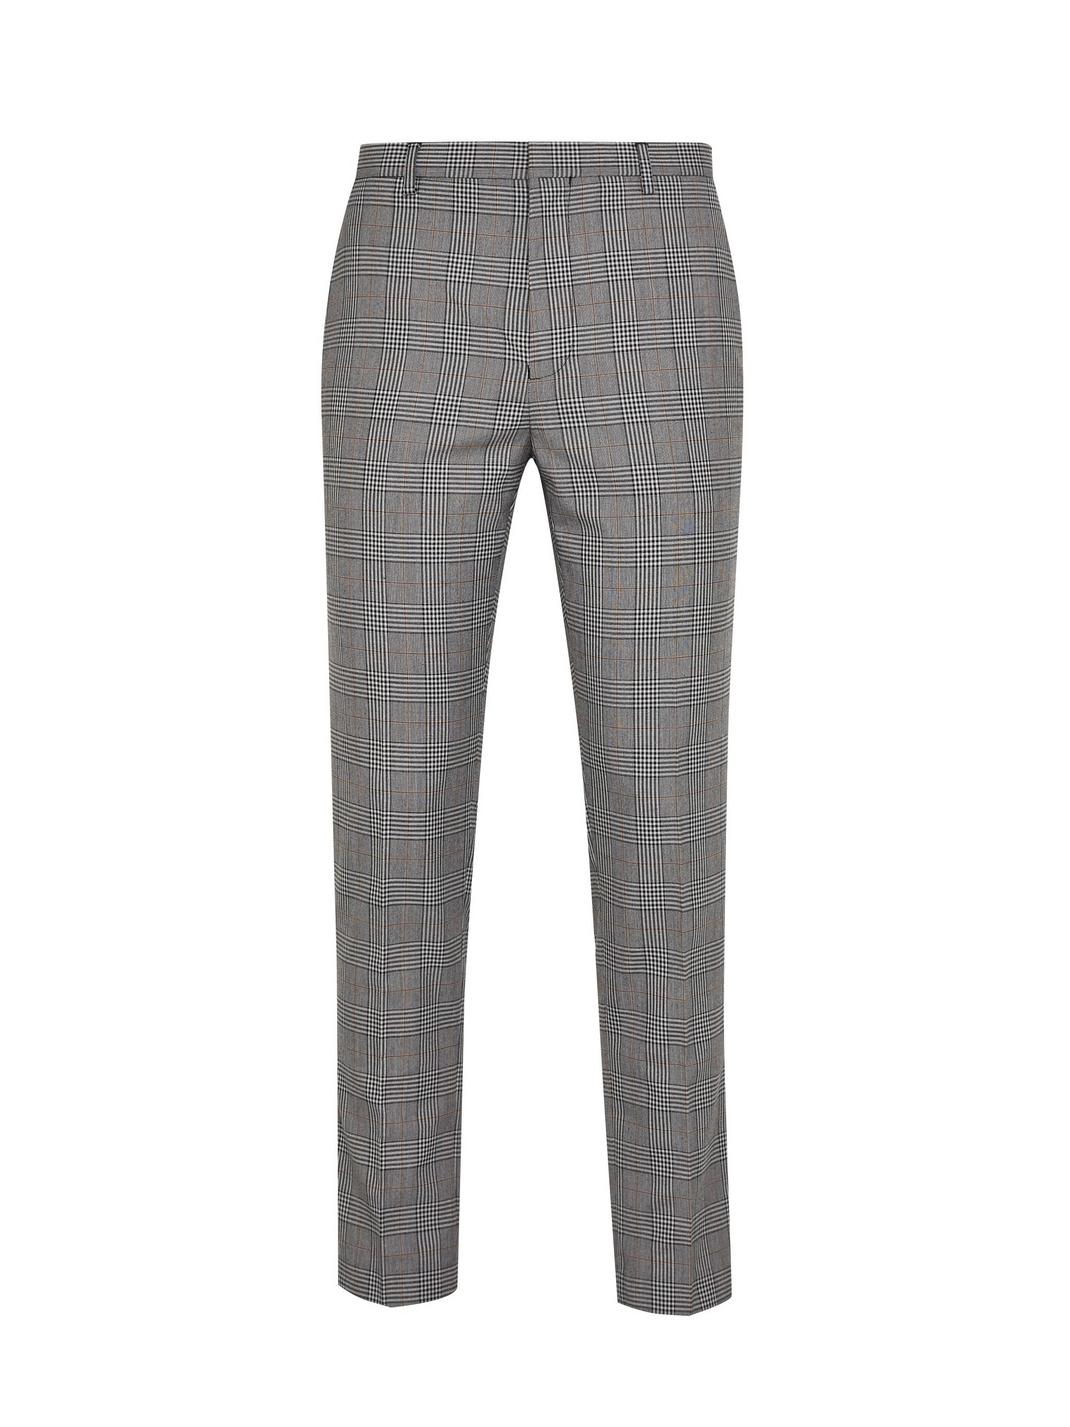 131 Charcoal Skinny Check Trousers image number 1